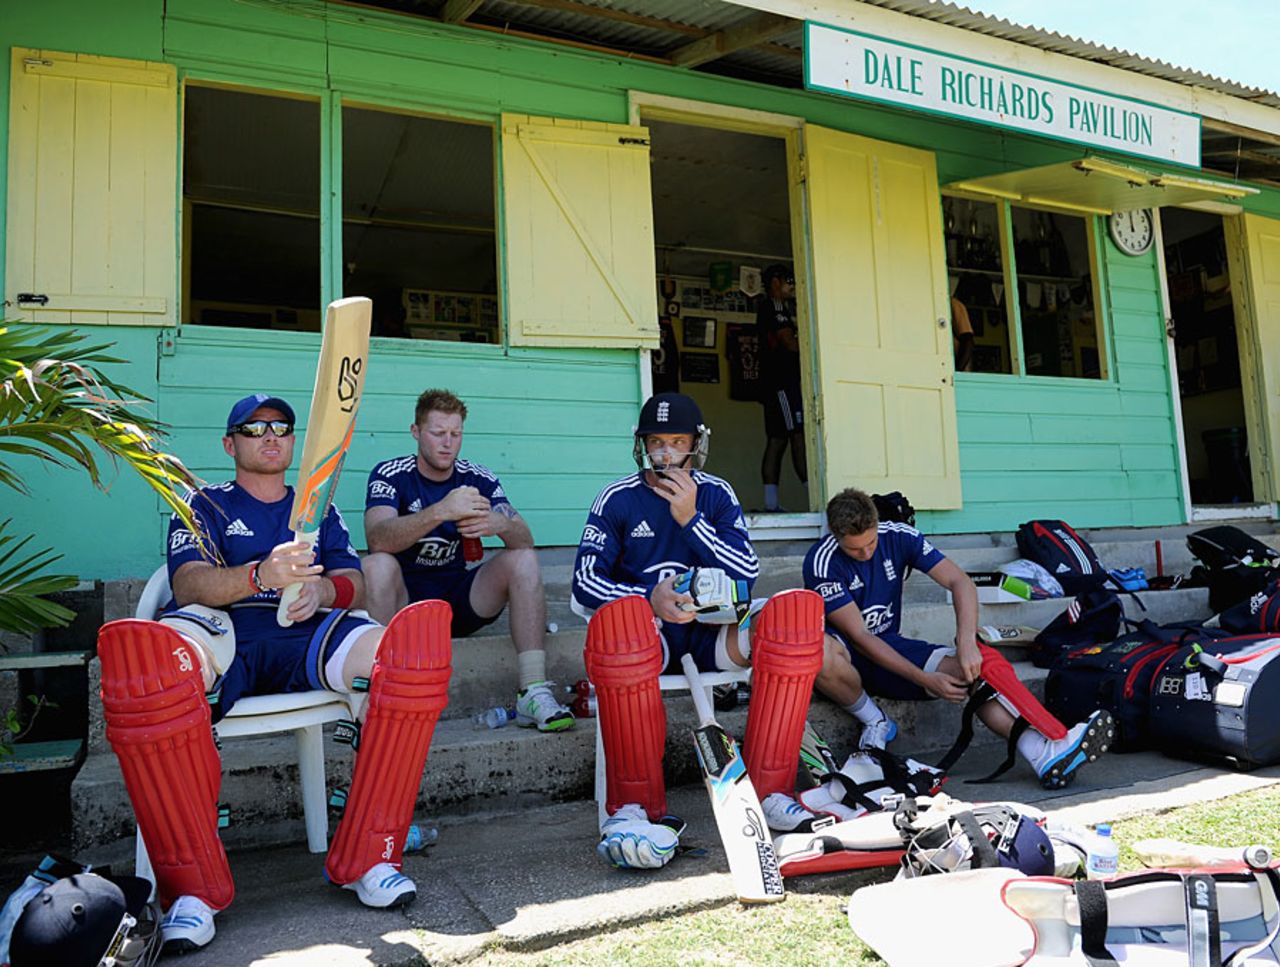 Ian Bell waits with team-mates for his turn to bat, Isolation Cricket Club, Barbados, March 8, 2014